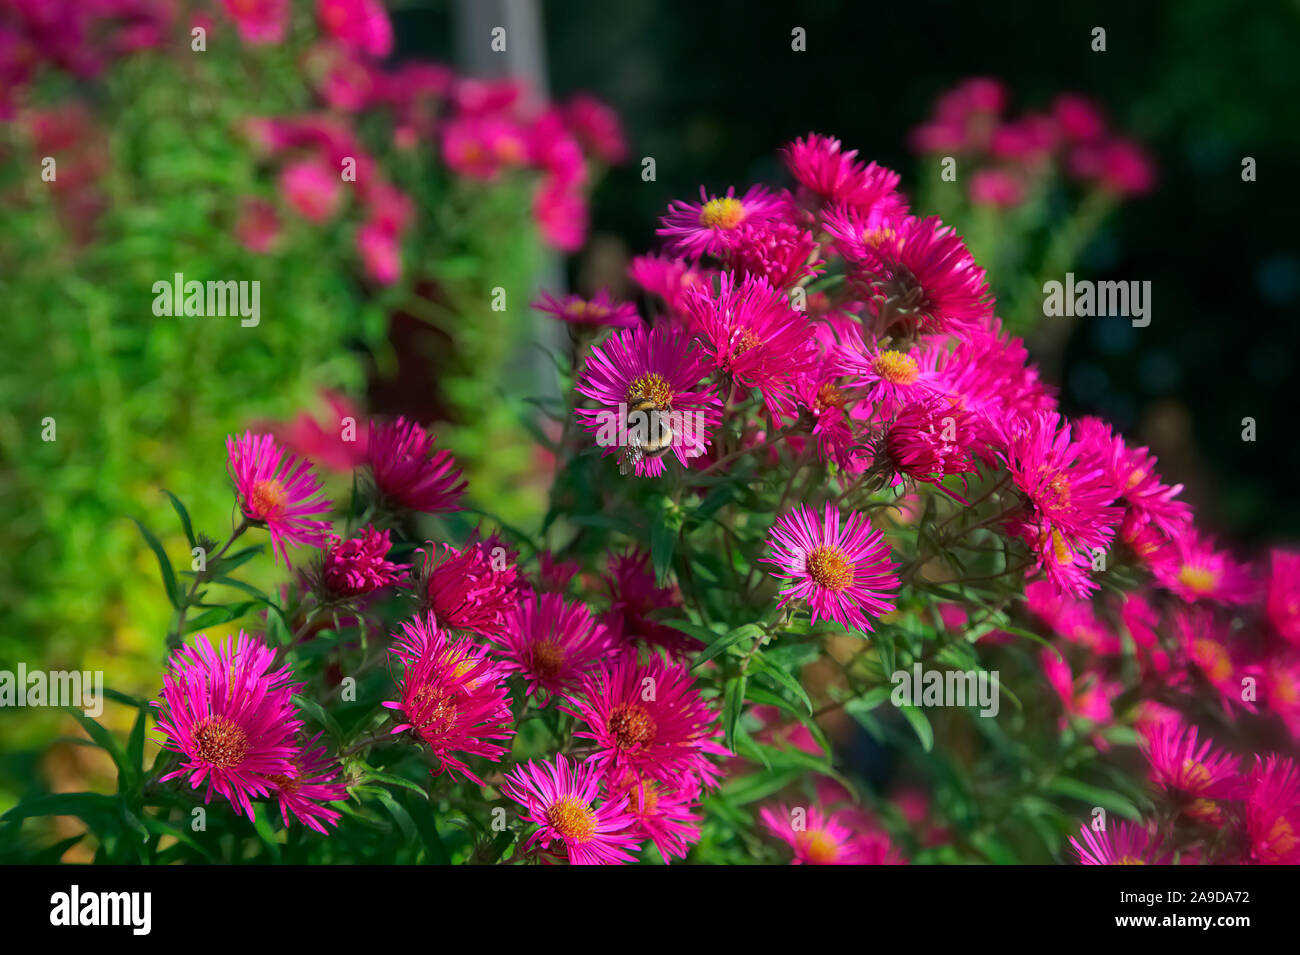 Symphyotrichum novae-angliae 'James Ritchie' syn. Aster Stock Photo